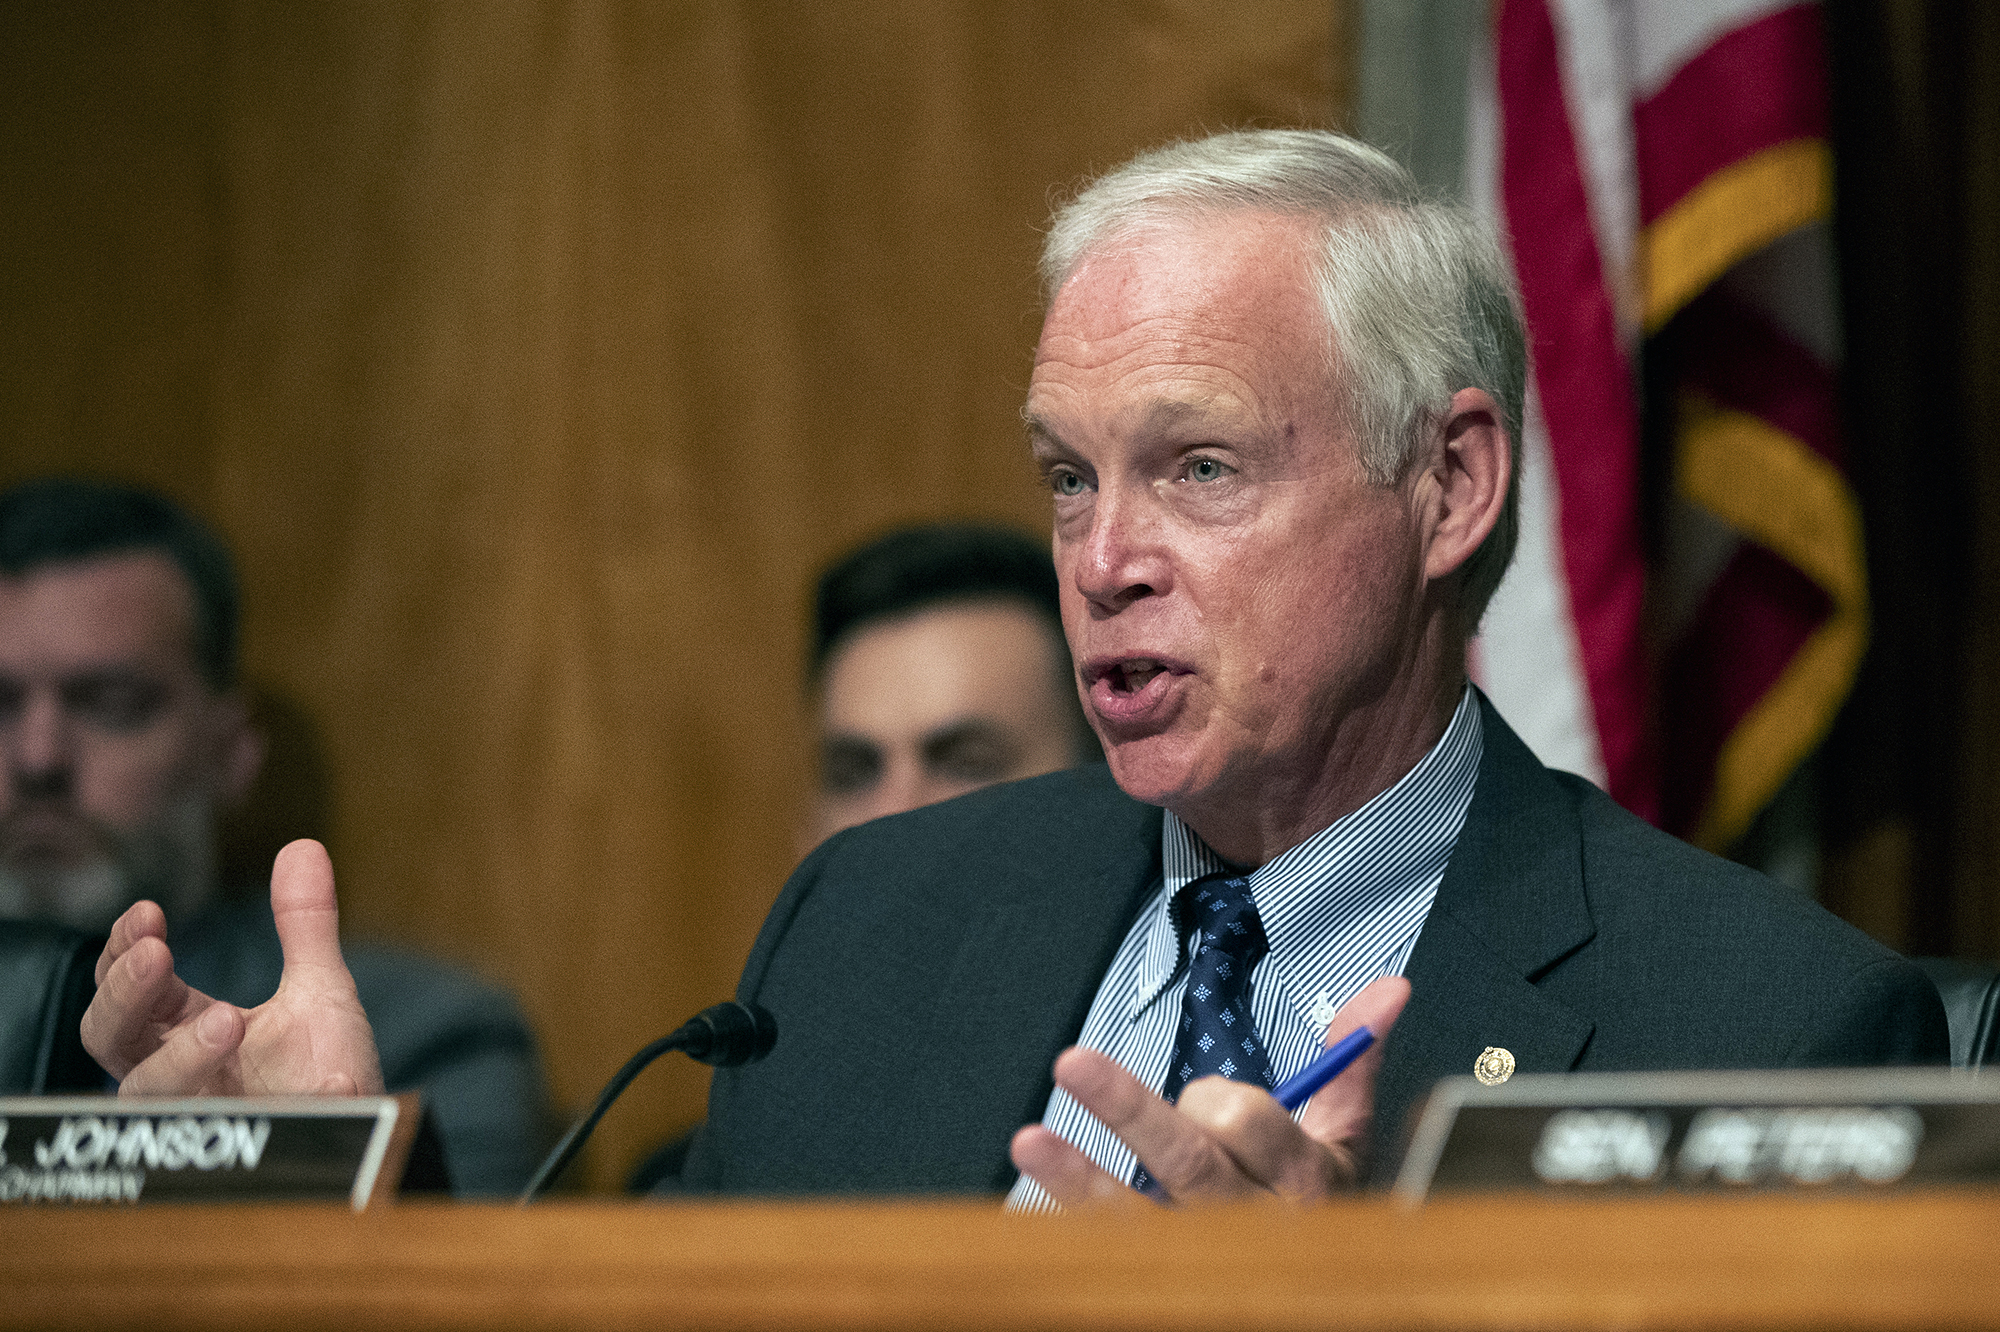 Ron Johnson: Trump Has Not Done Anything Impeachable But Senate Trial Likely